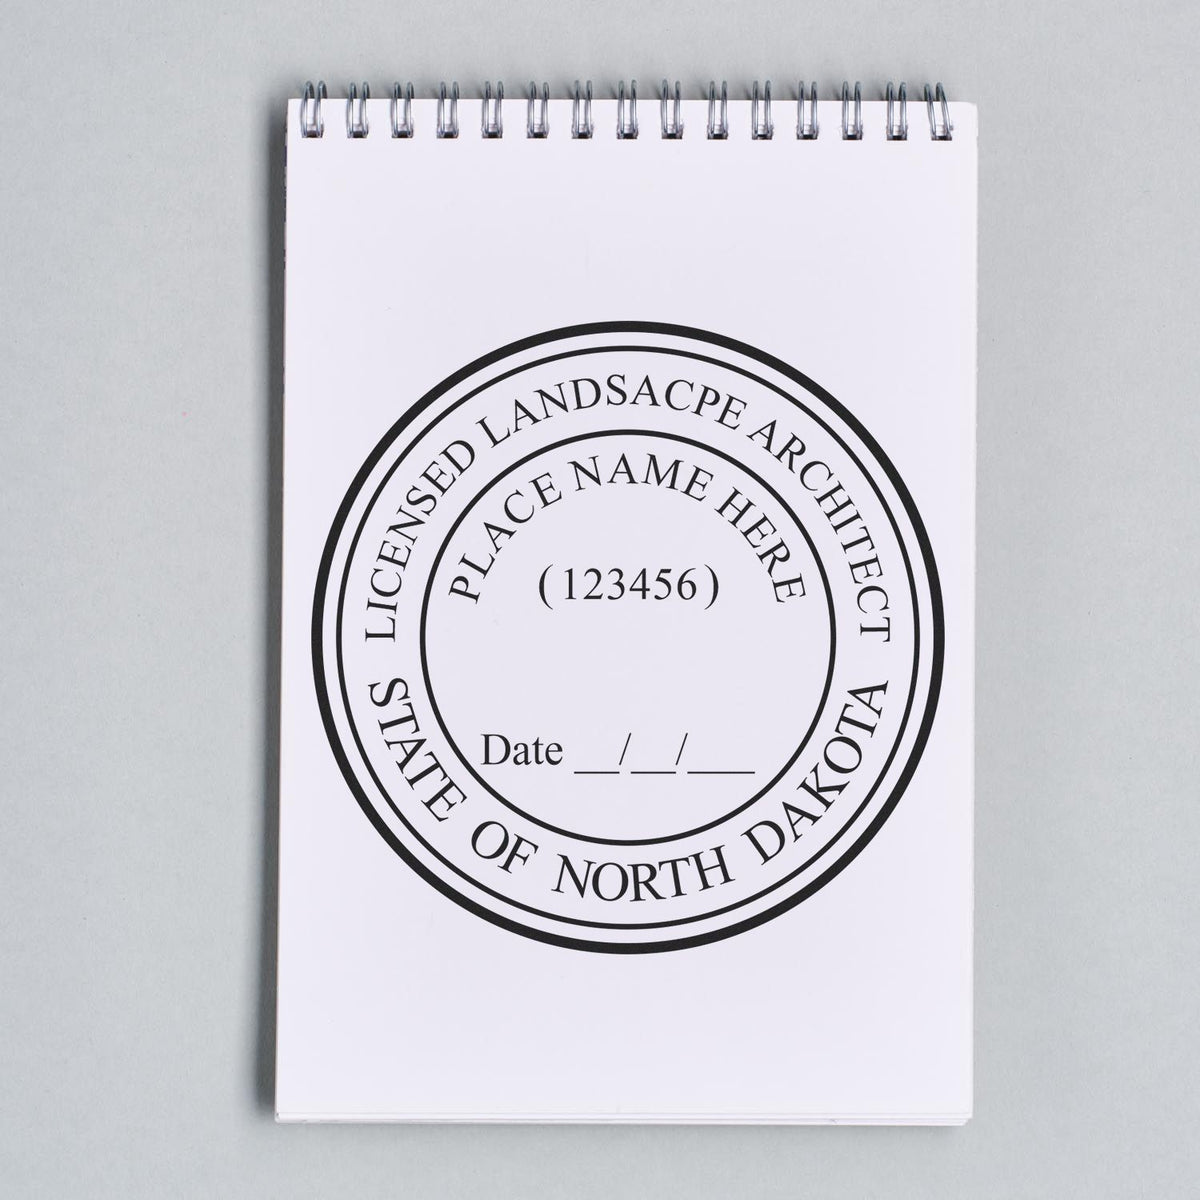 This paper is stamped with a sample imprint of the Slim Pre-Inked North Dakota Landscape Architect Seal Stamp, signifying its quality and reliability.